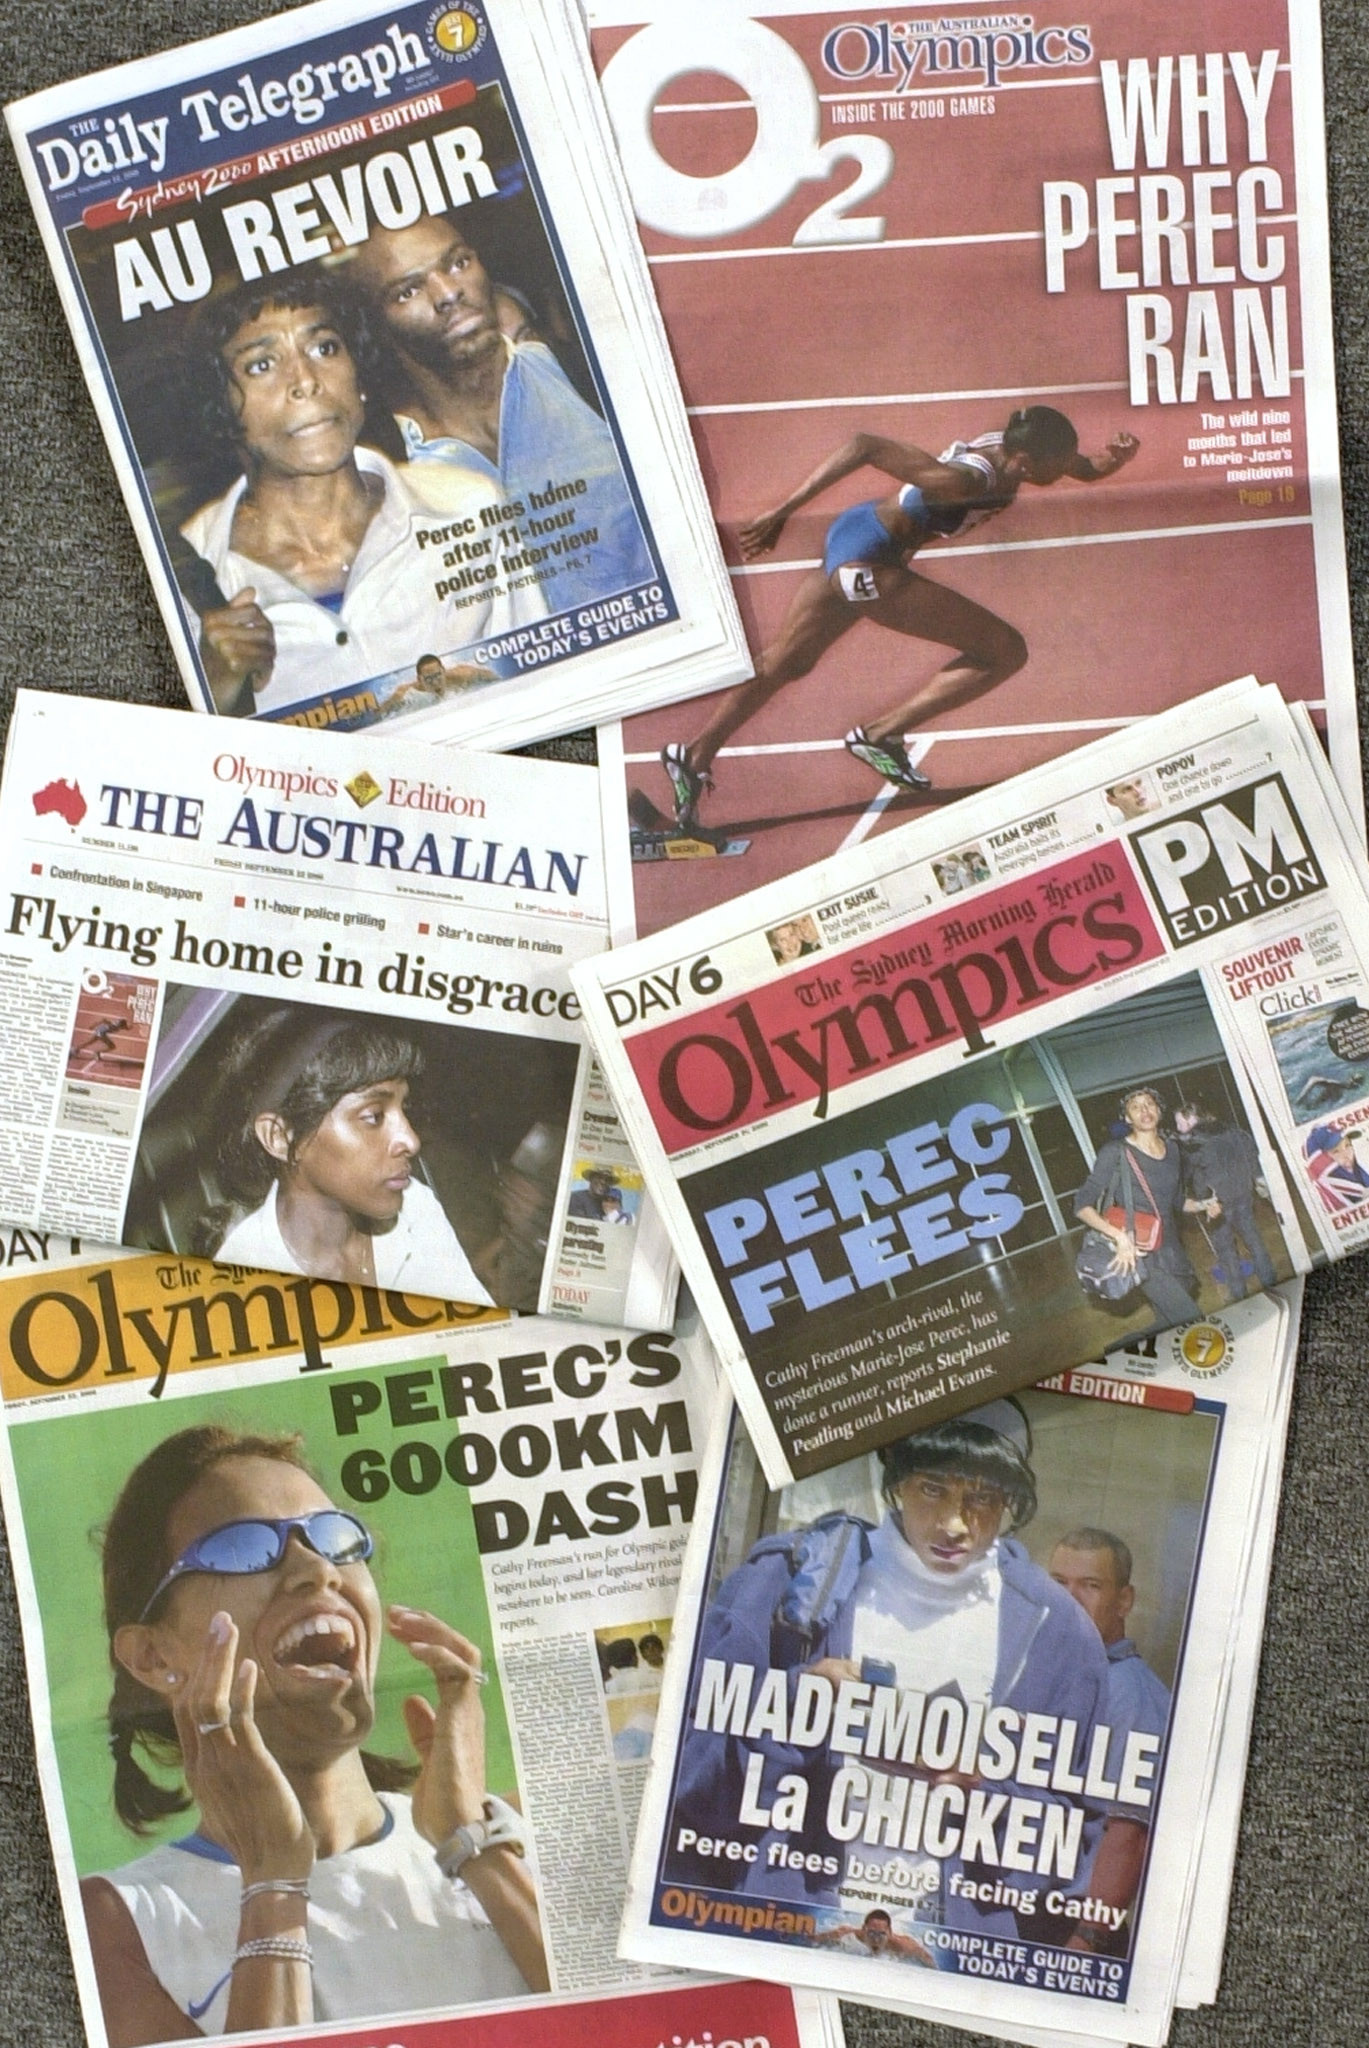 Cathy Freeman's greatest rival, France's defending Olympic 400m champion Marie-José Pérec, fled Sydney 2000 before the event had even started claiming she was the victim of an unfair campaign of dirty tricks by the Australian media ©Getty Images